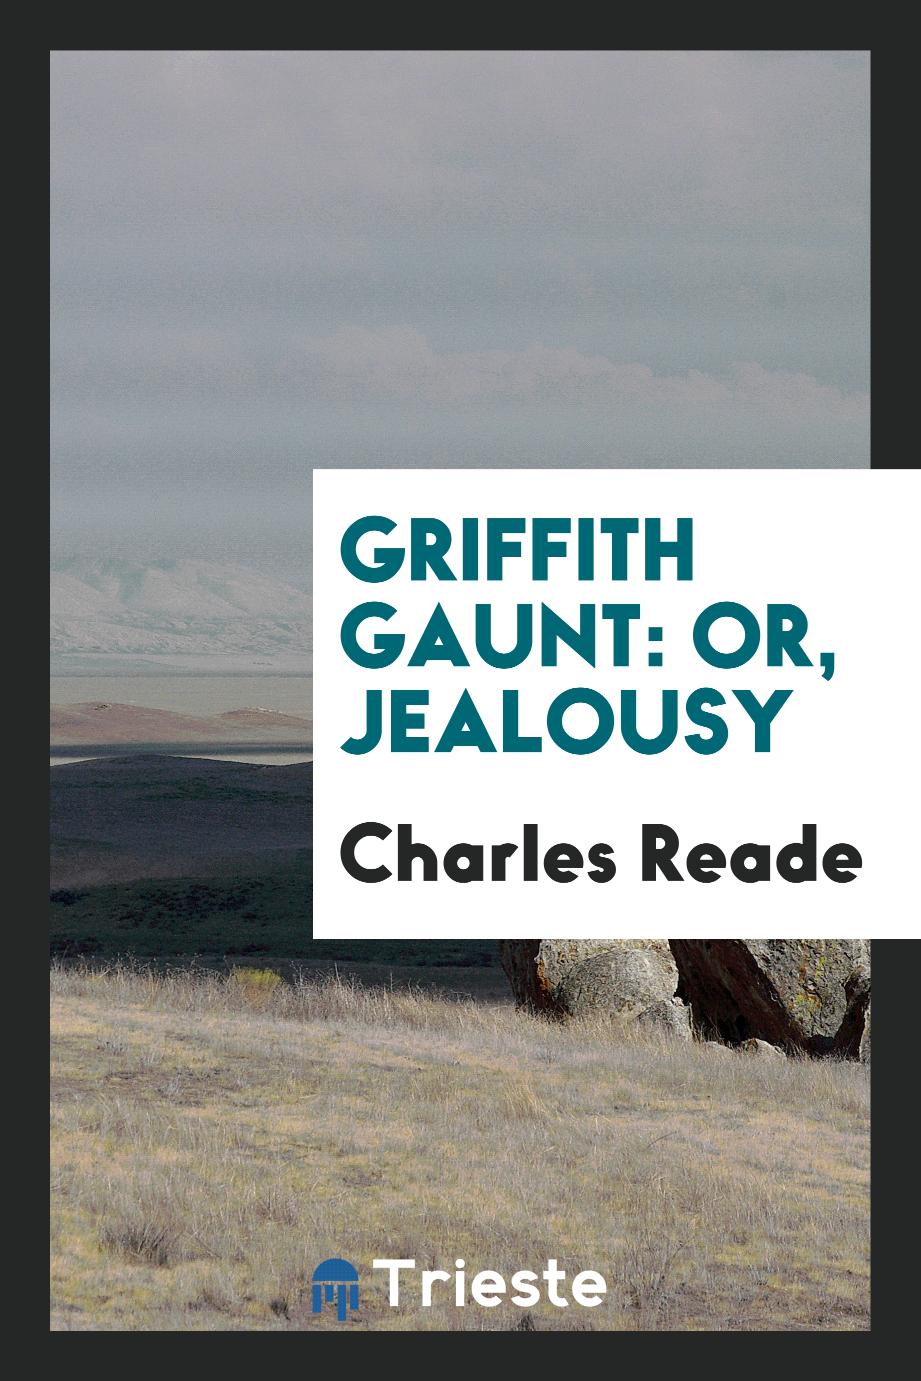 Griffith Gaunt: Or, Jealousy